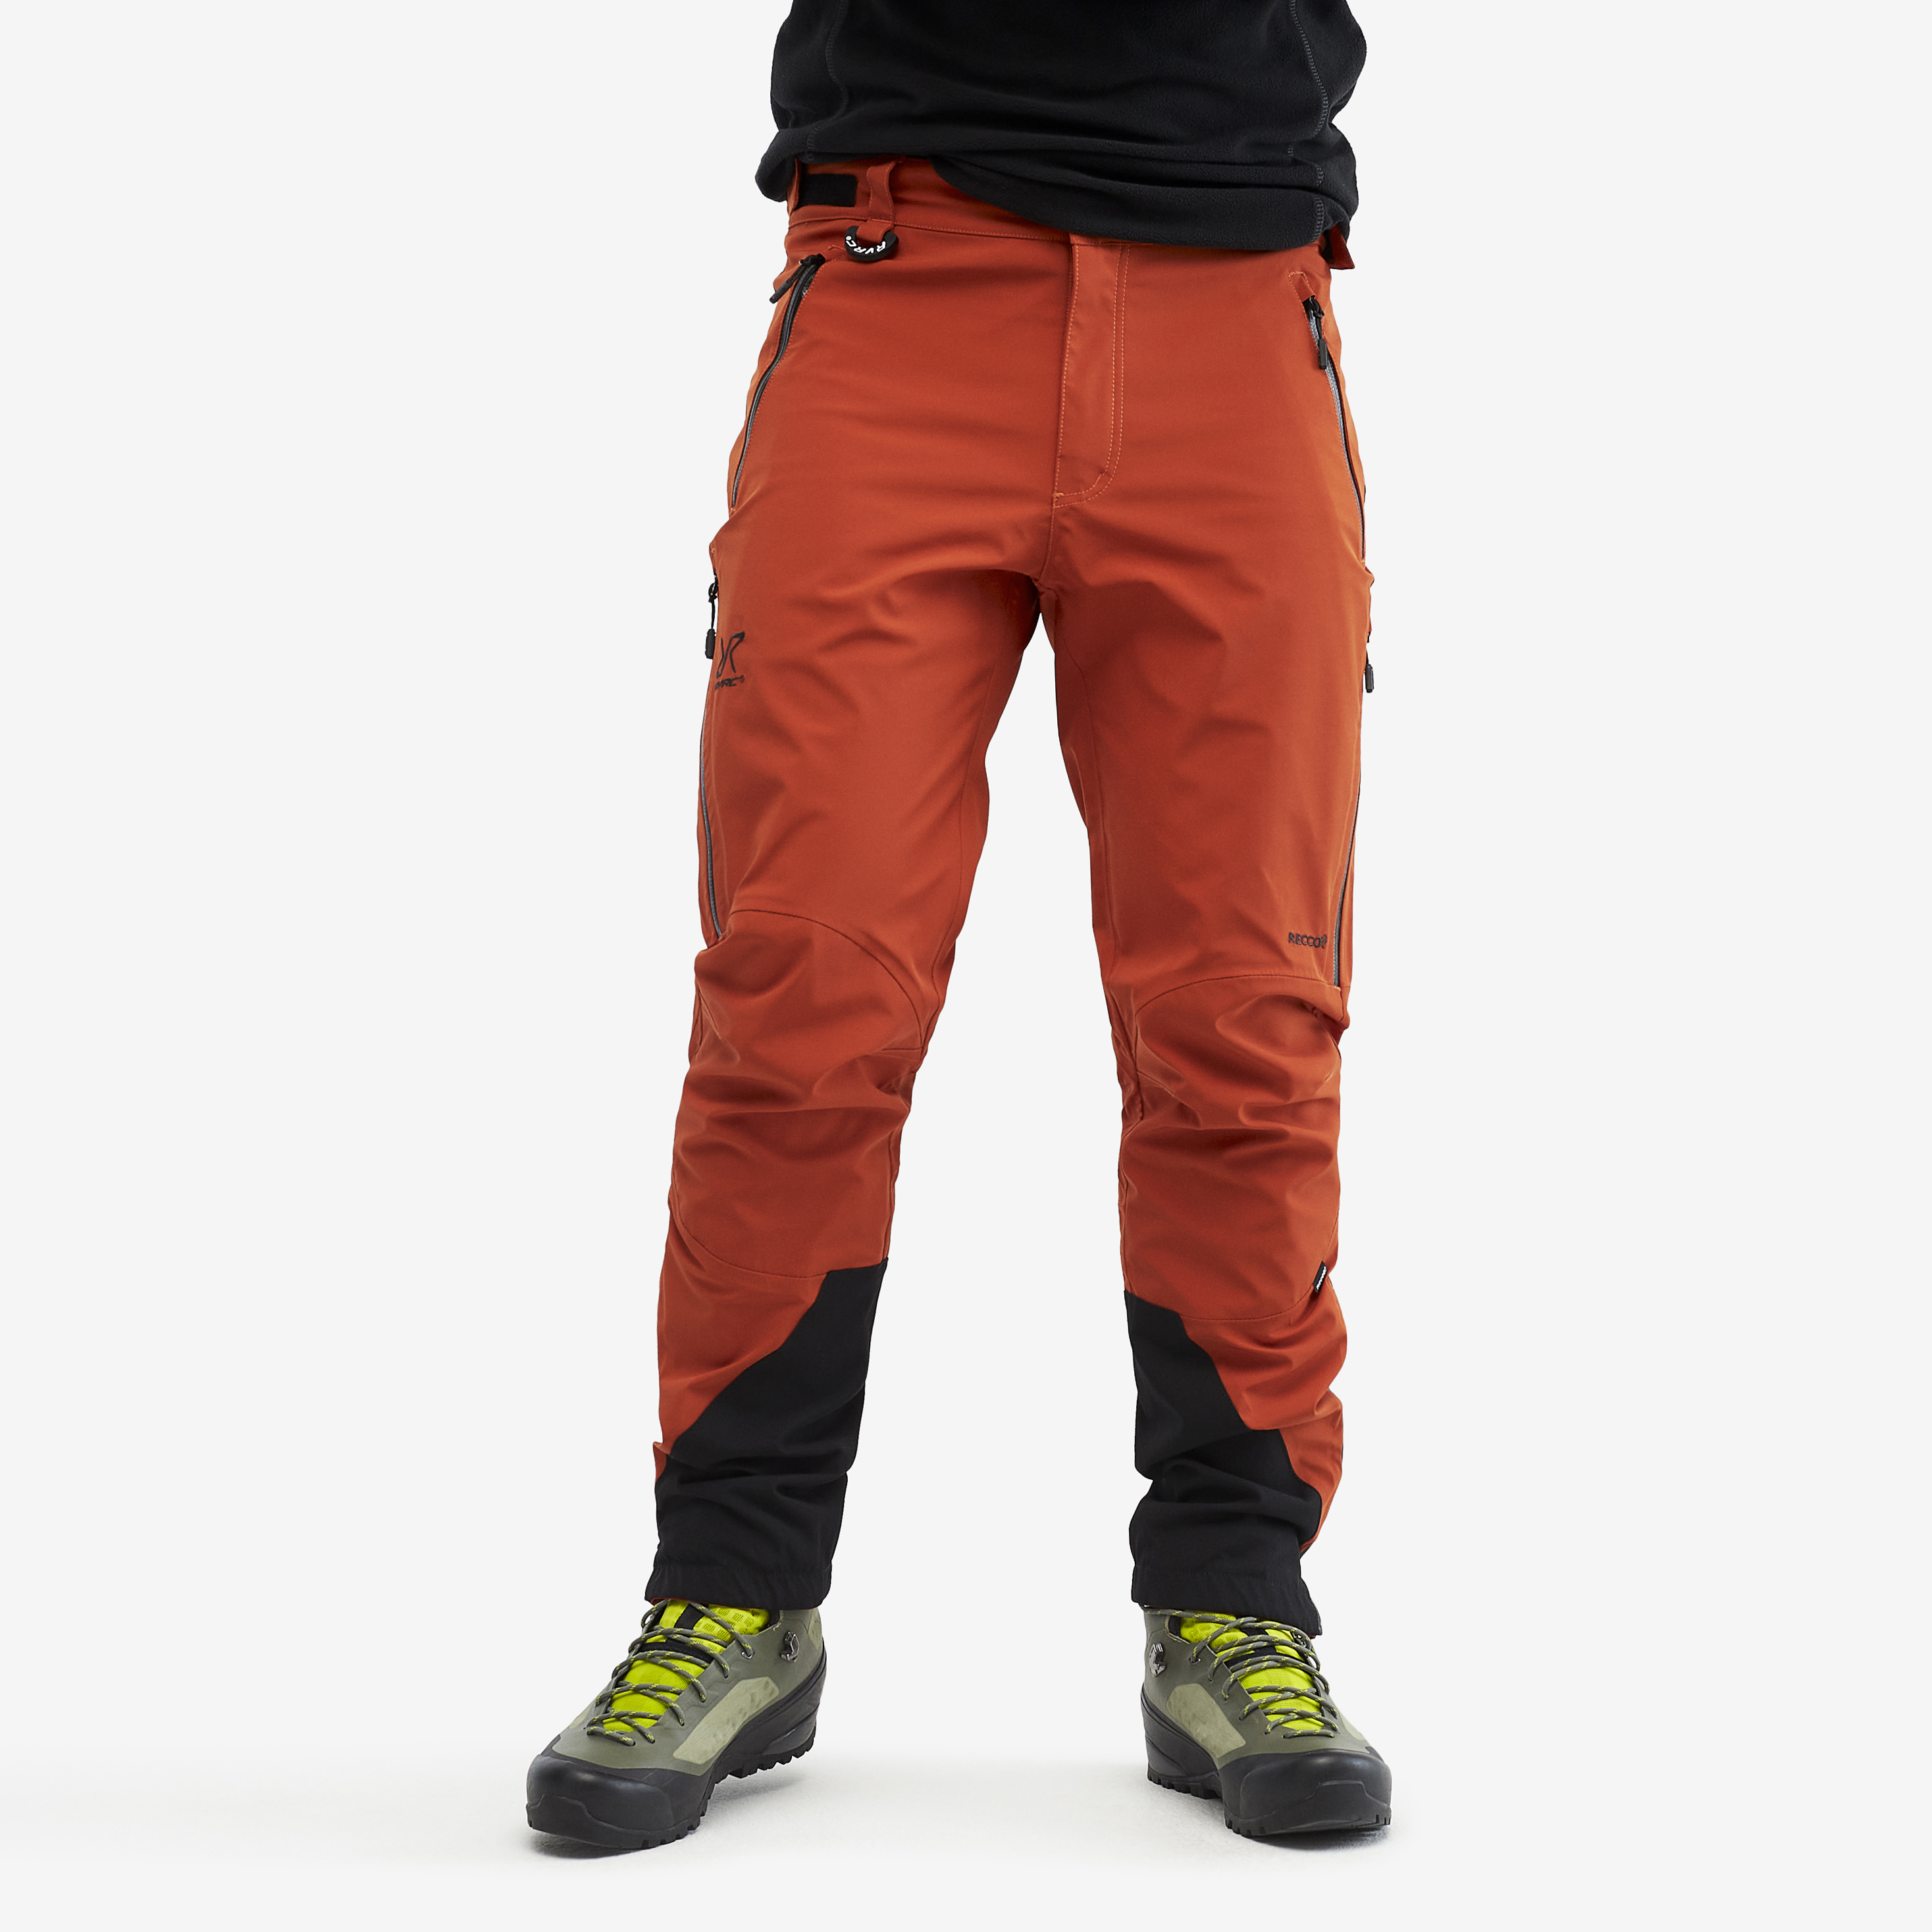 Cyclone Rescue Pants Autumn Hombres